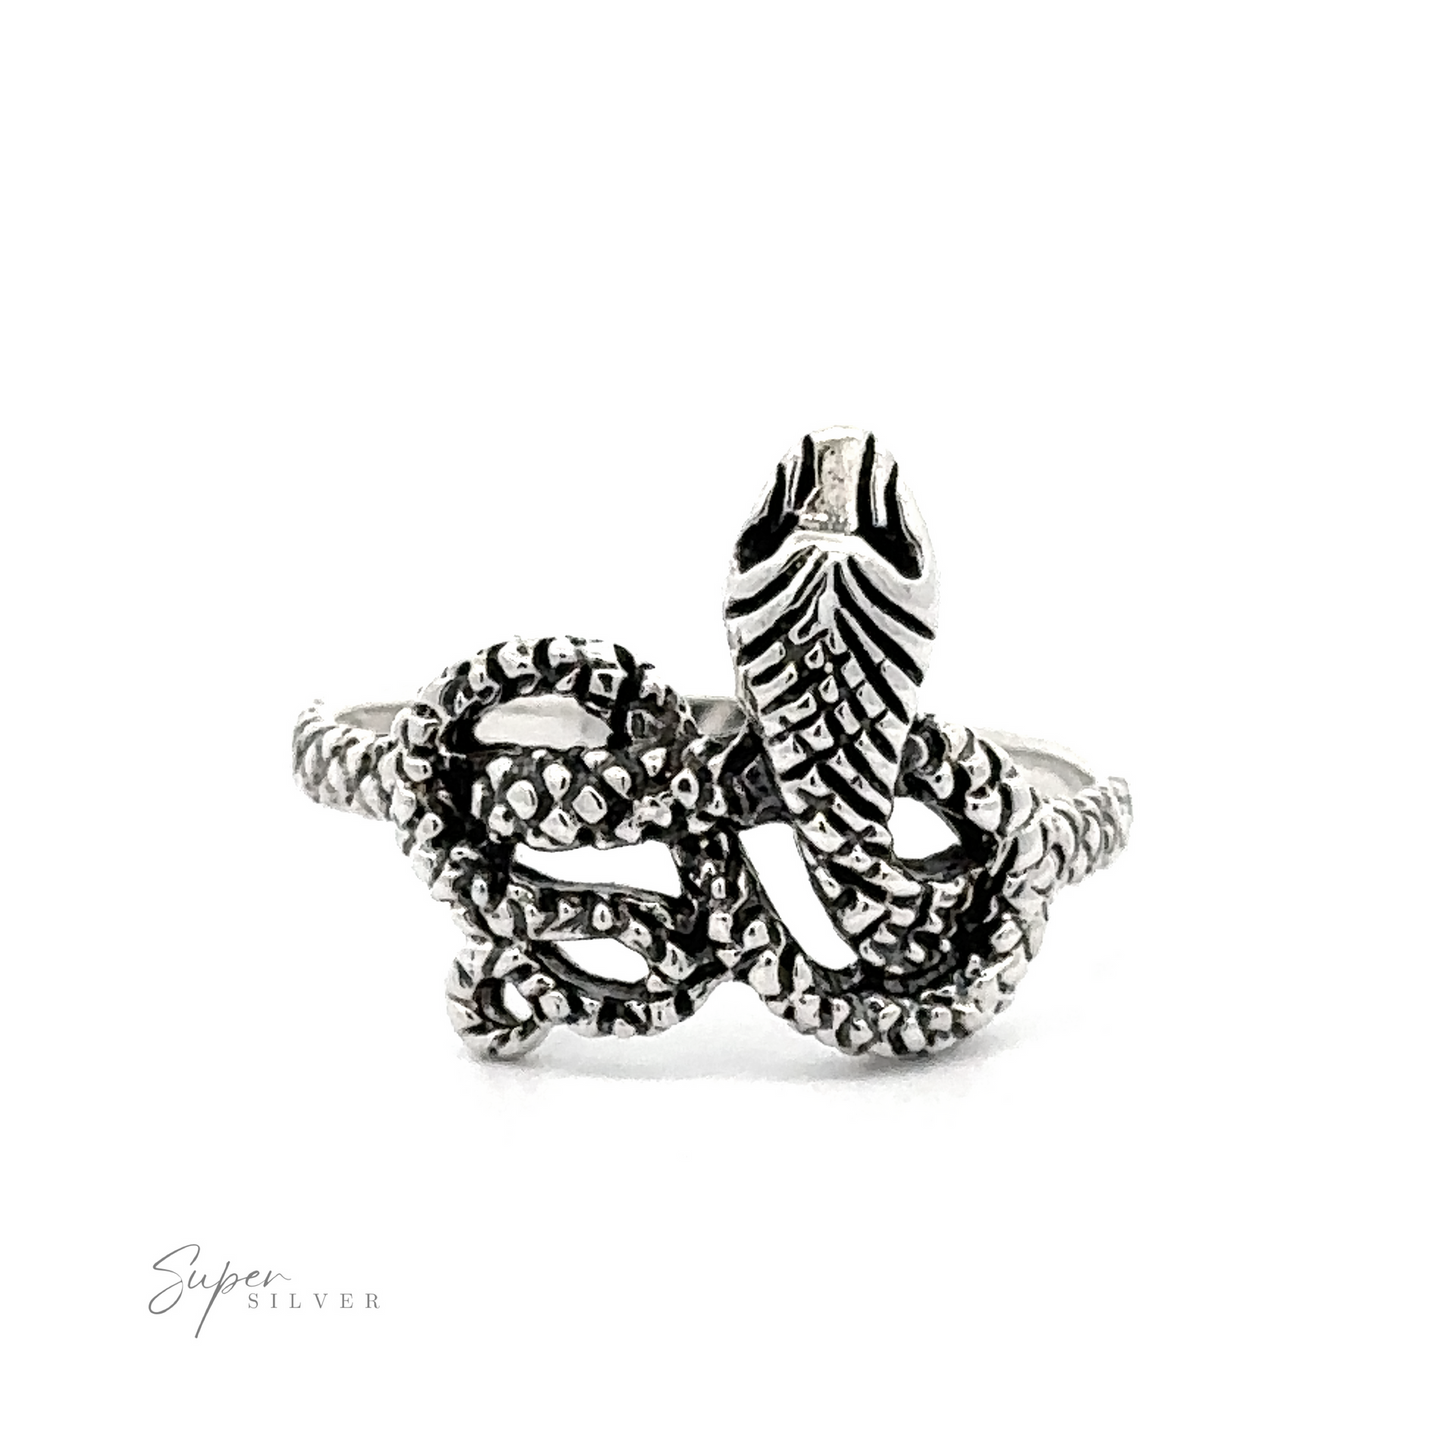 Sentence with product name: A Twisted Snake Ring featuring two intertwined, textured snake designs, set against a white background with a "super silver" watermark.